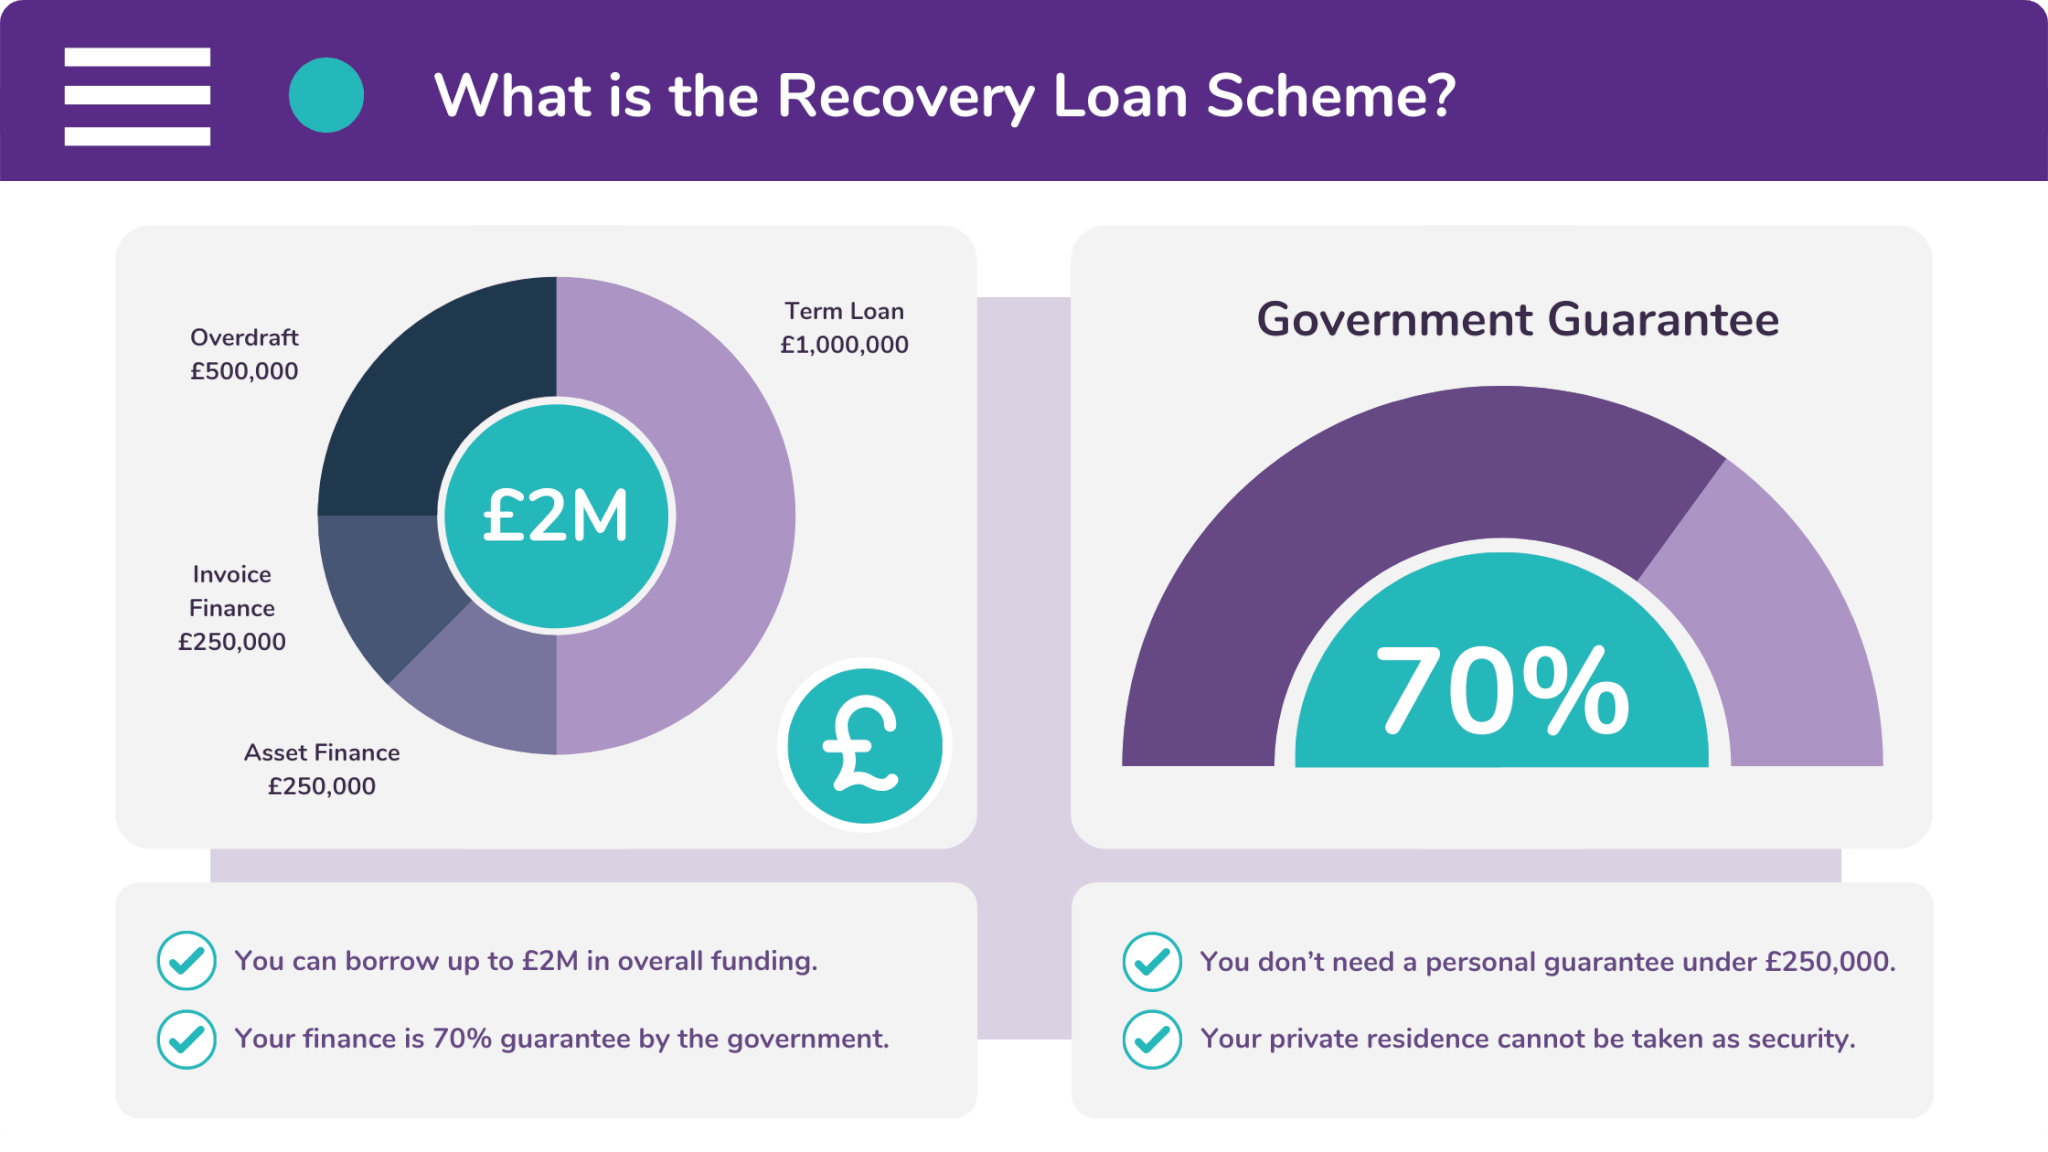 The Recovery Loan Scheme gives UK businesses access to up to £2M in funding.